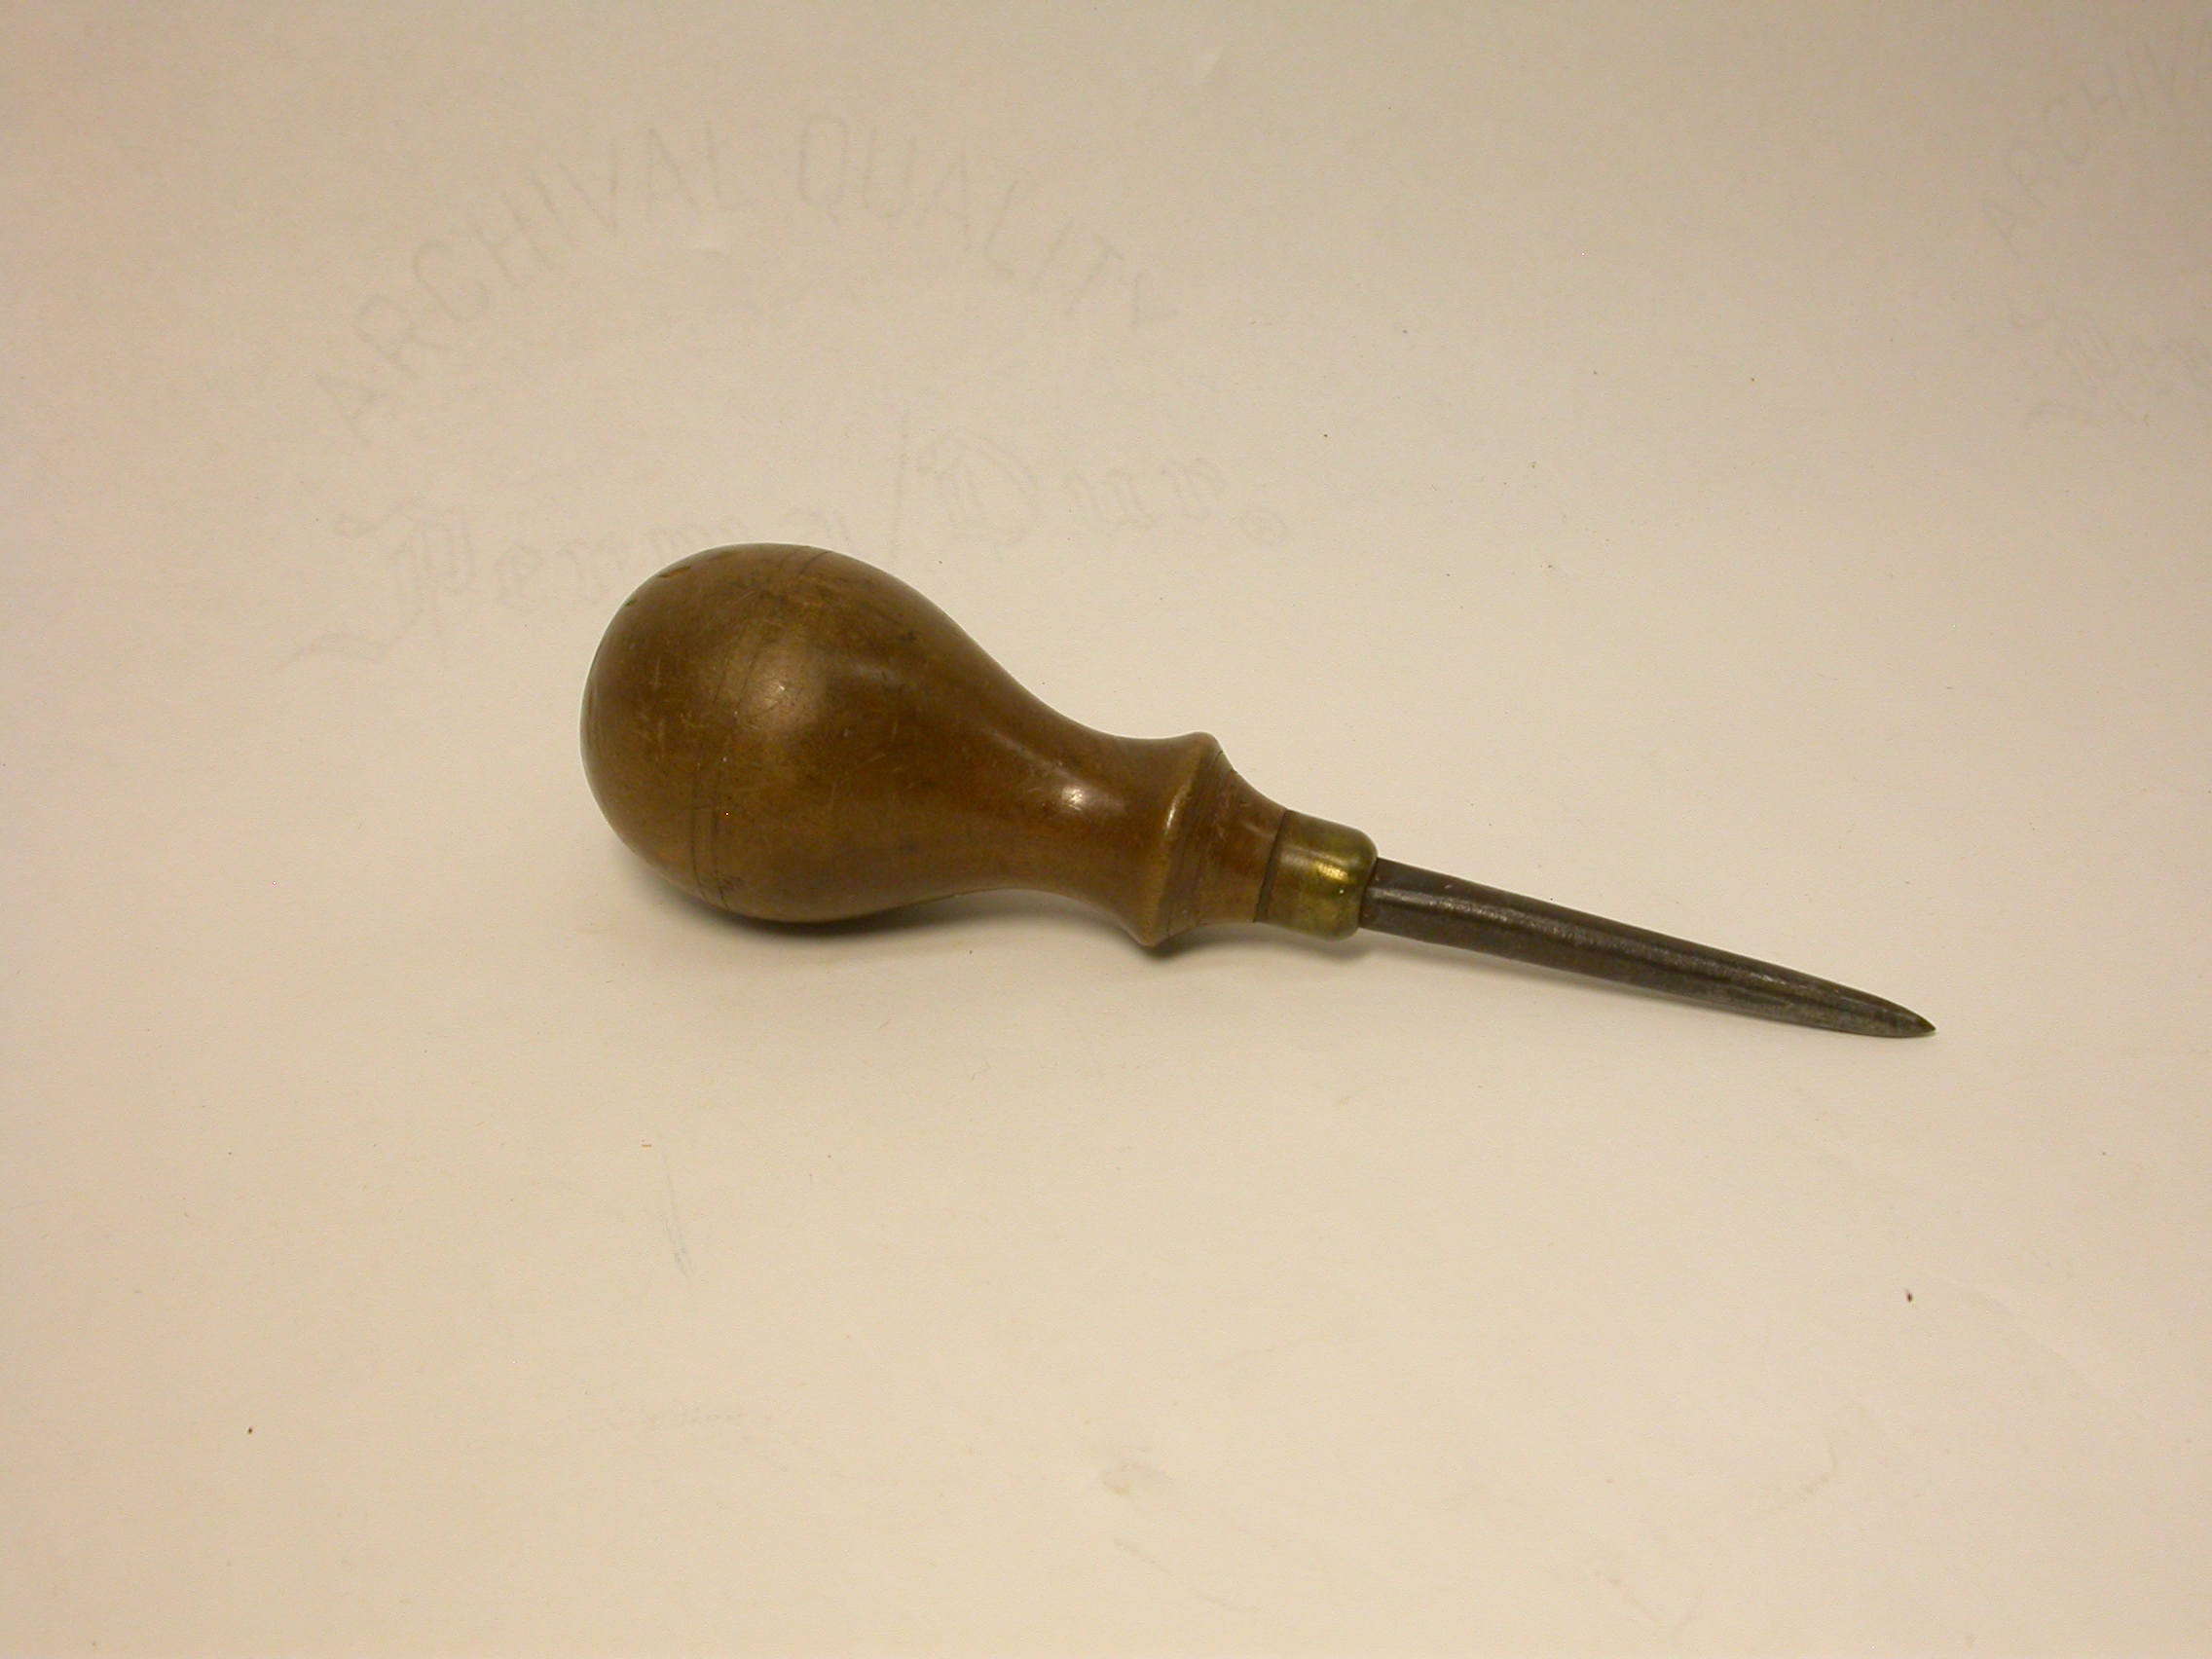 an%20awl%20with%20a%20wooden%20knobbed%20handle